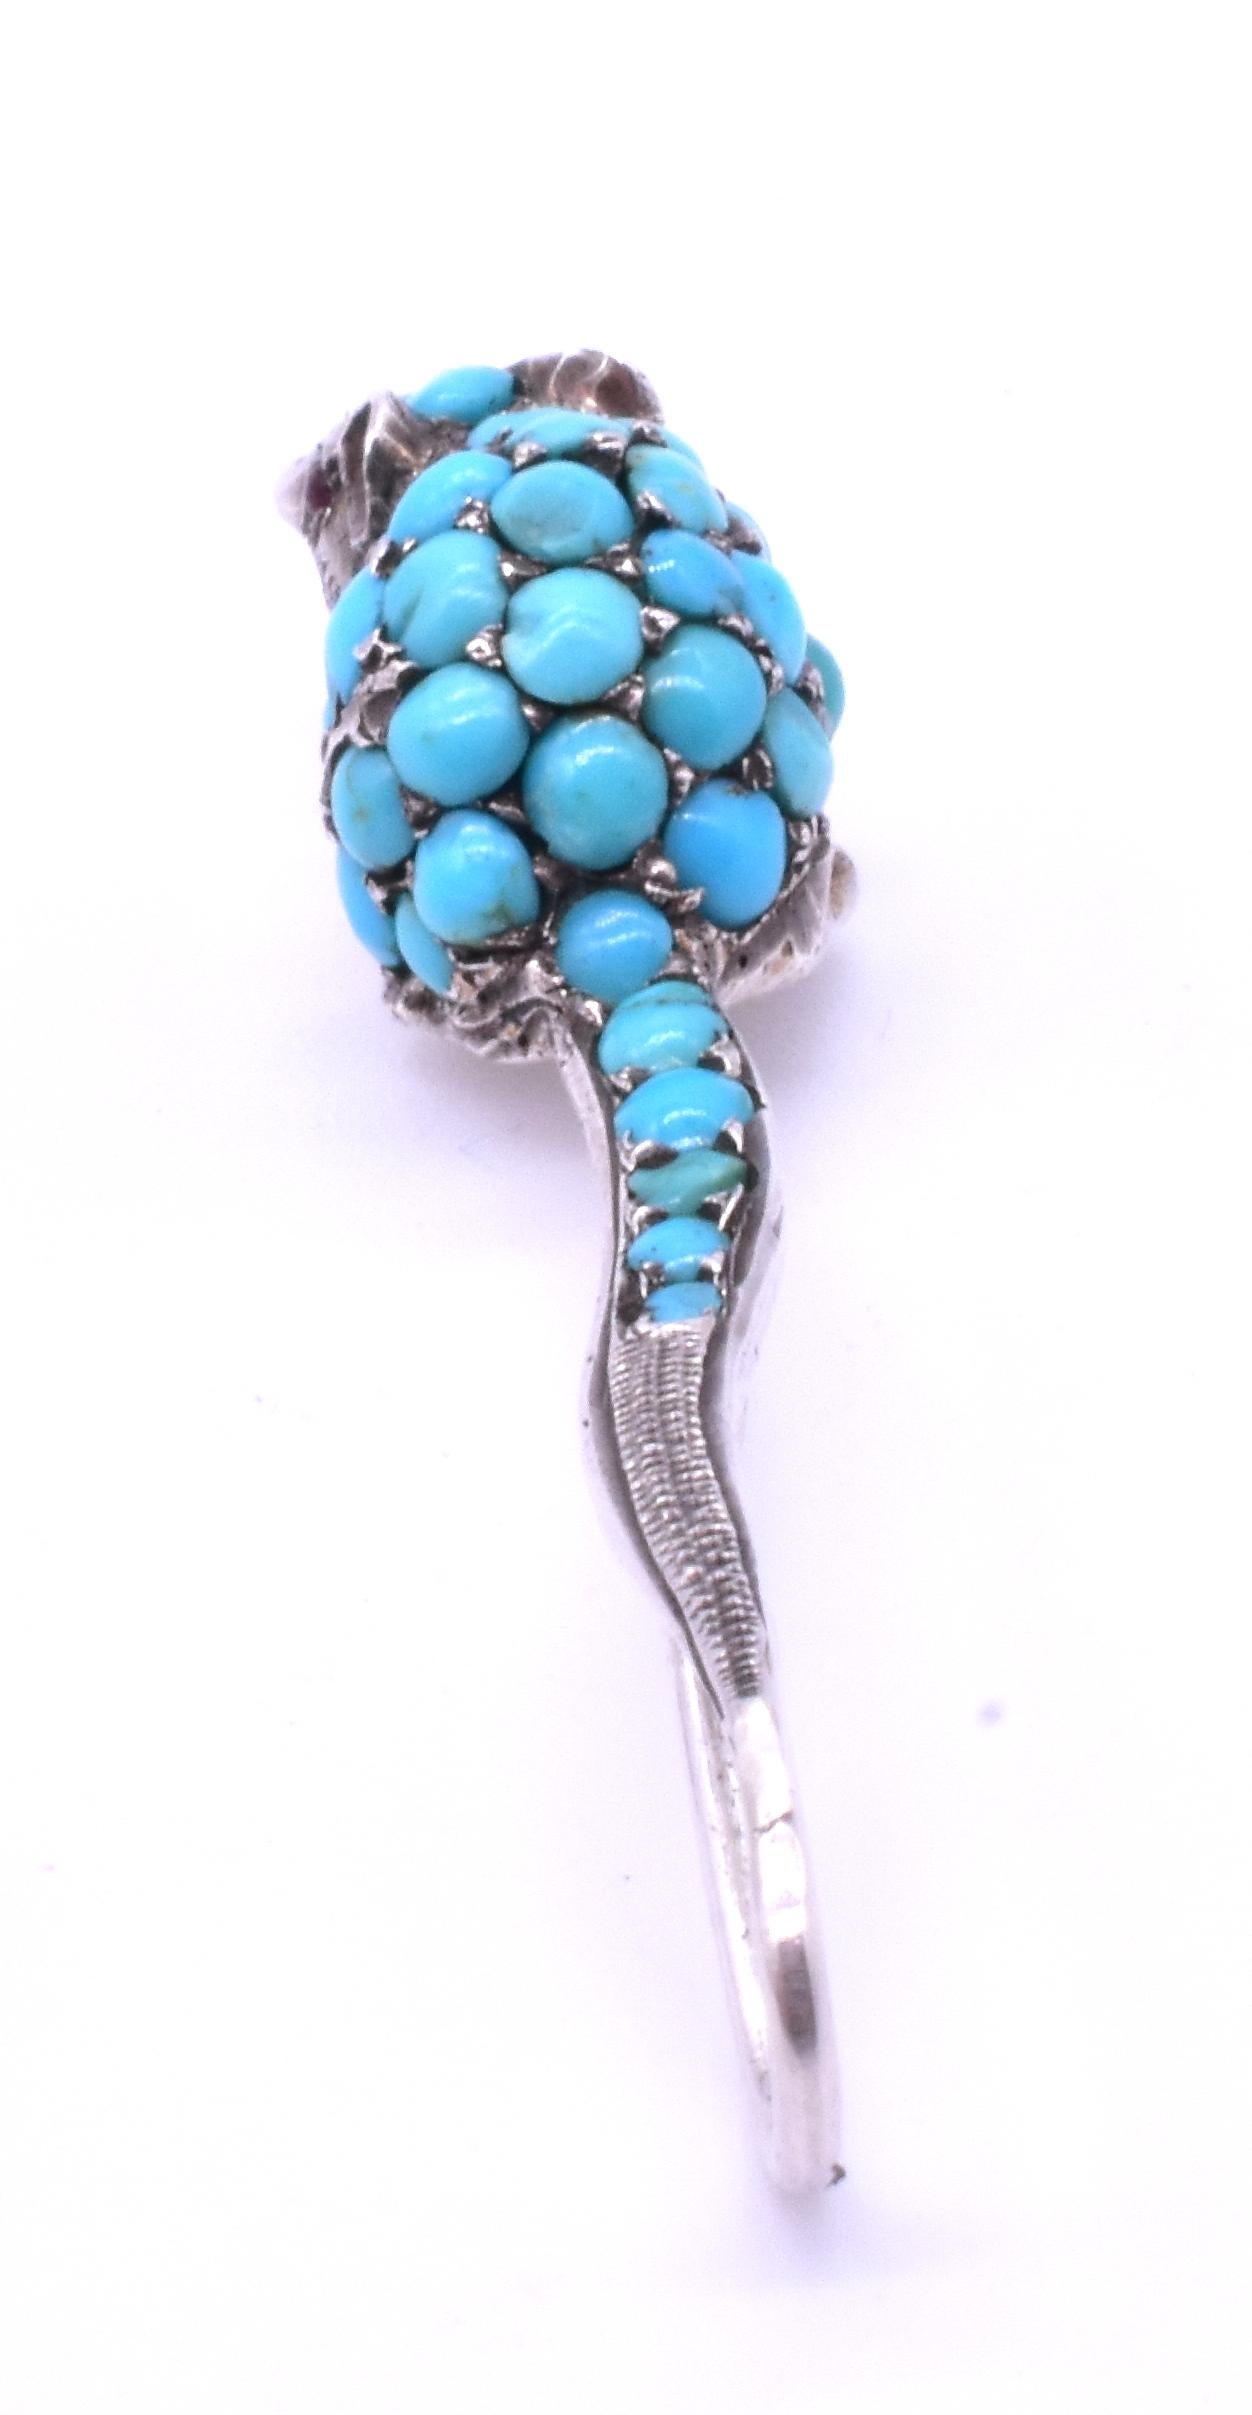 Cabochon Victorian Turquoise on Silver Mice Pendants